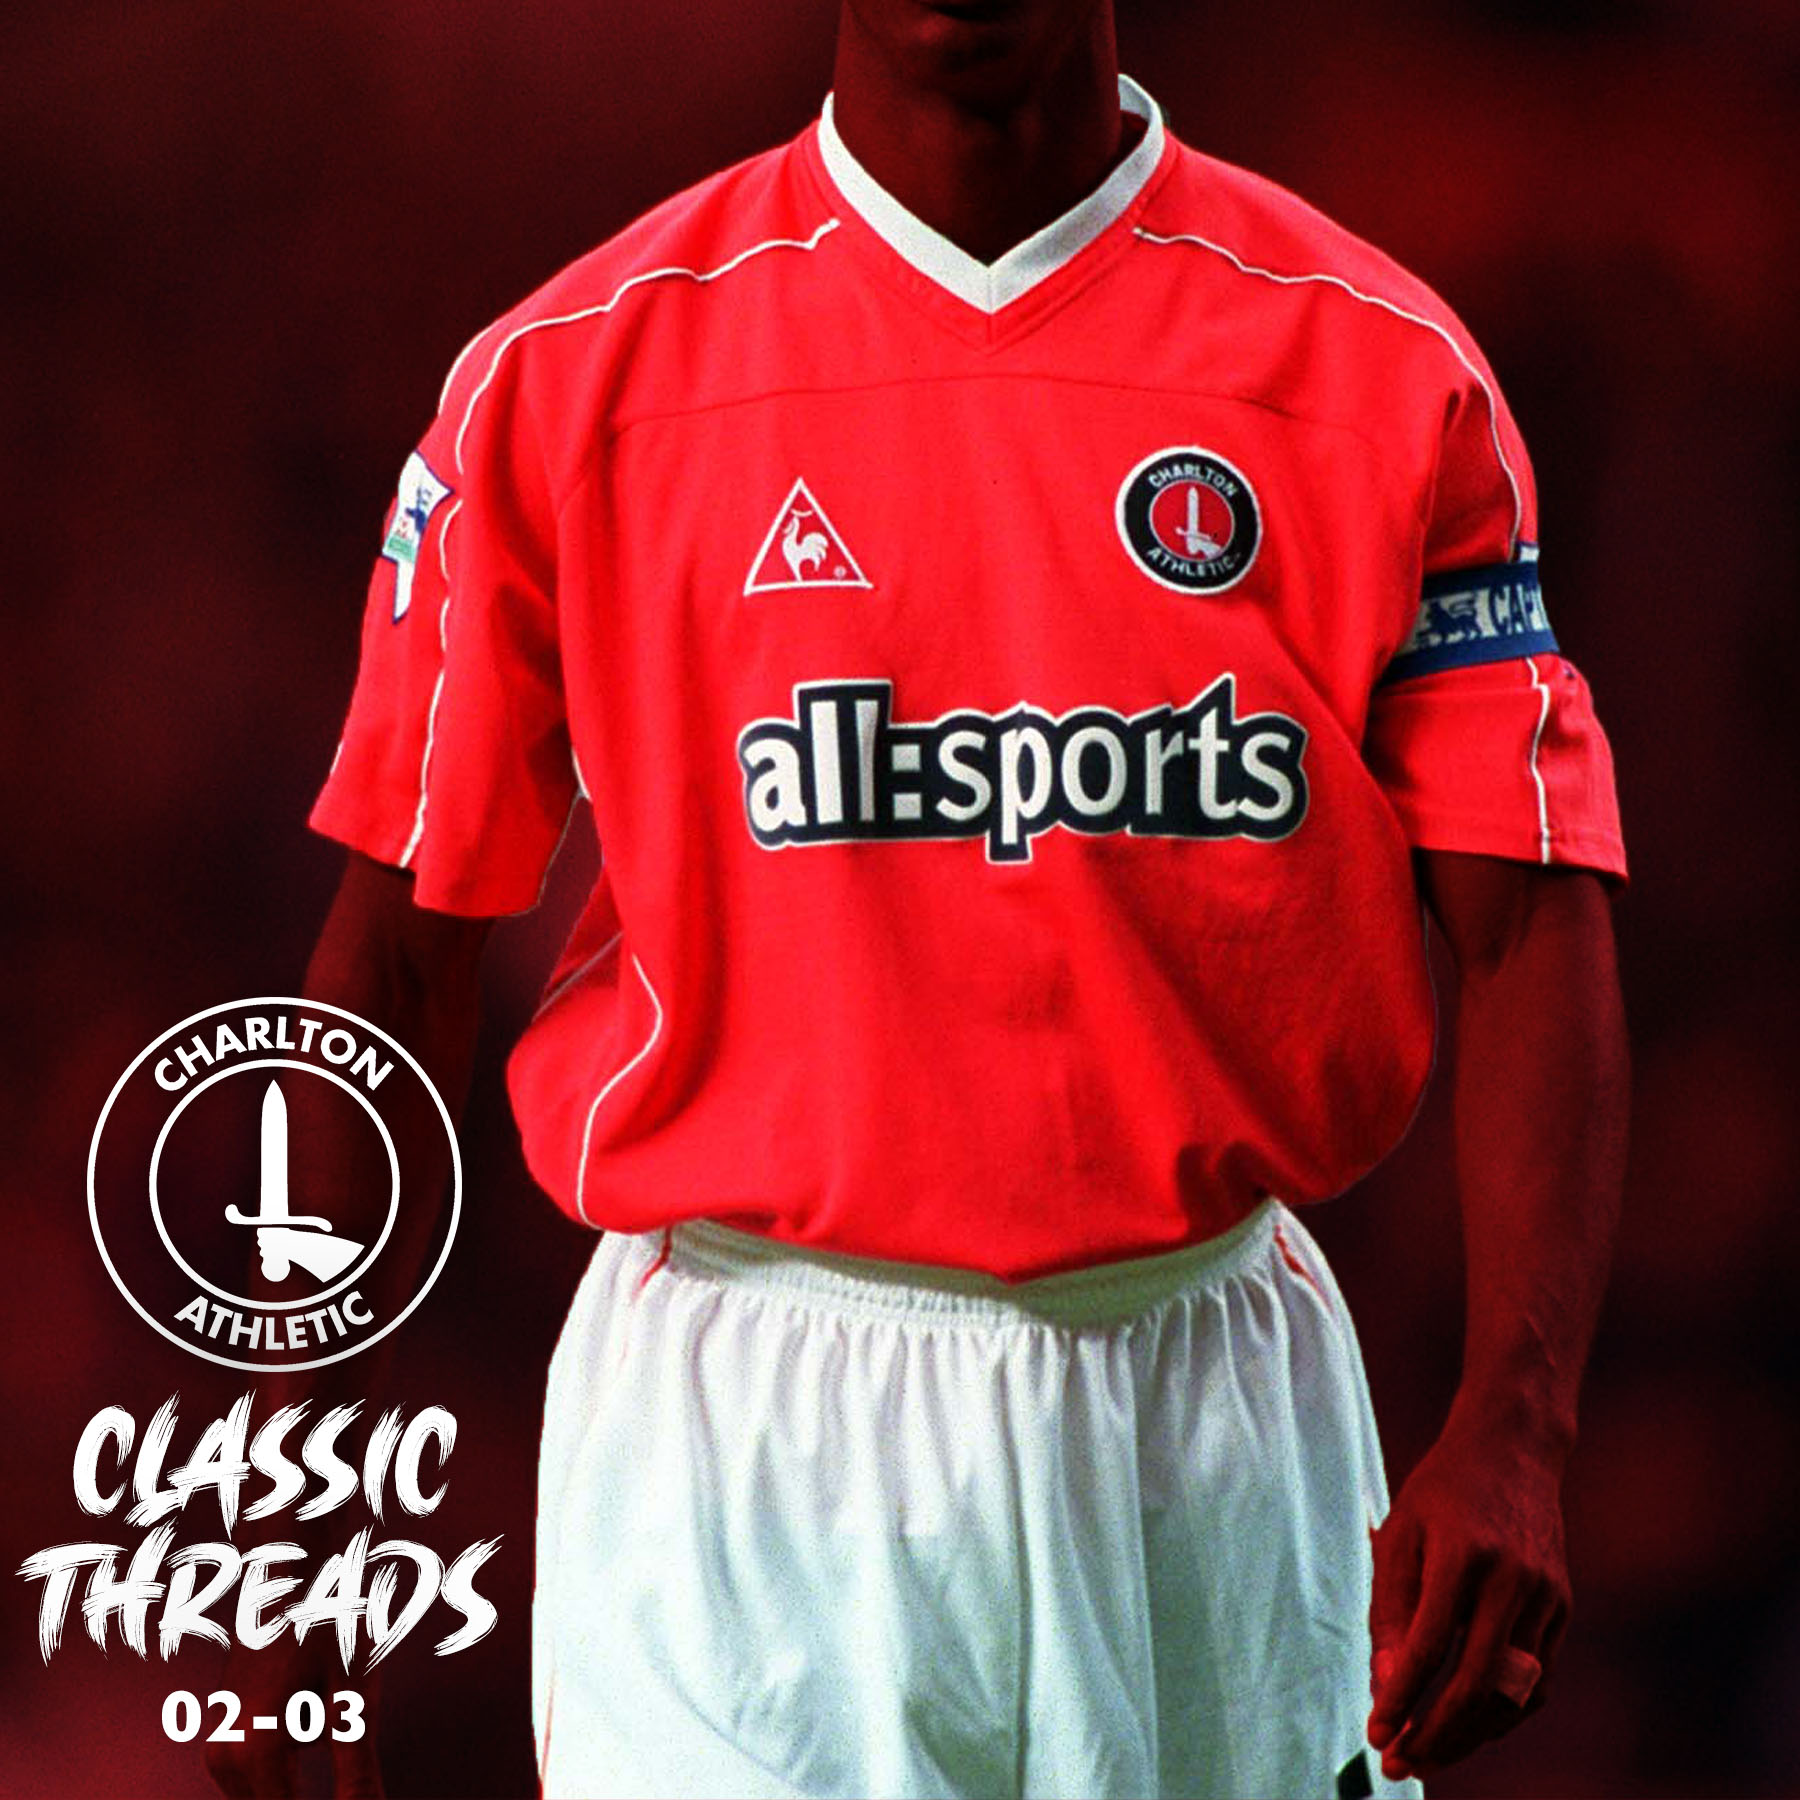 Charlton Athletic FC on Twitter: first player I think of when I see this kit is 🔴⚪ #cafc | https://t.co/f36HsGurv4 / Twitter